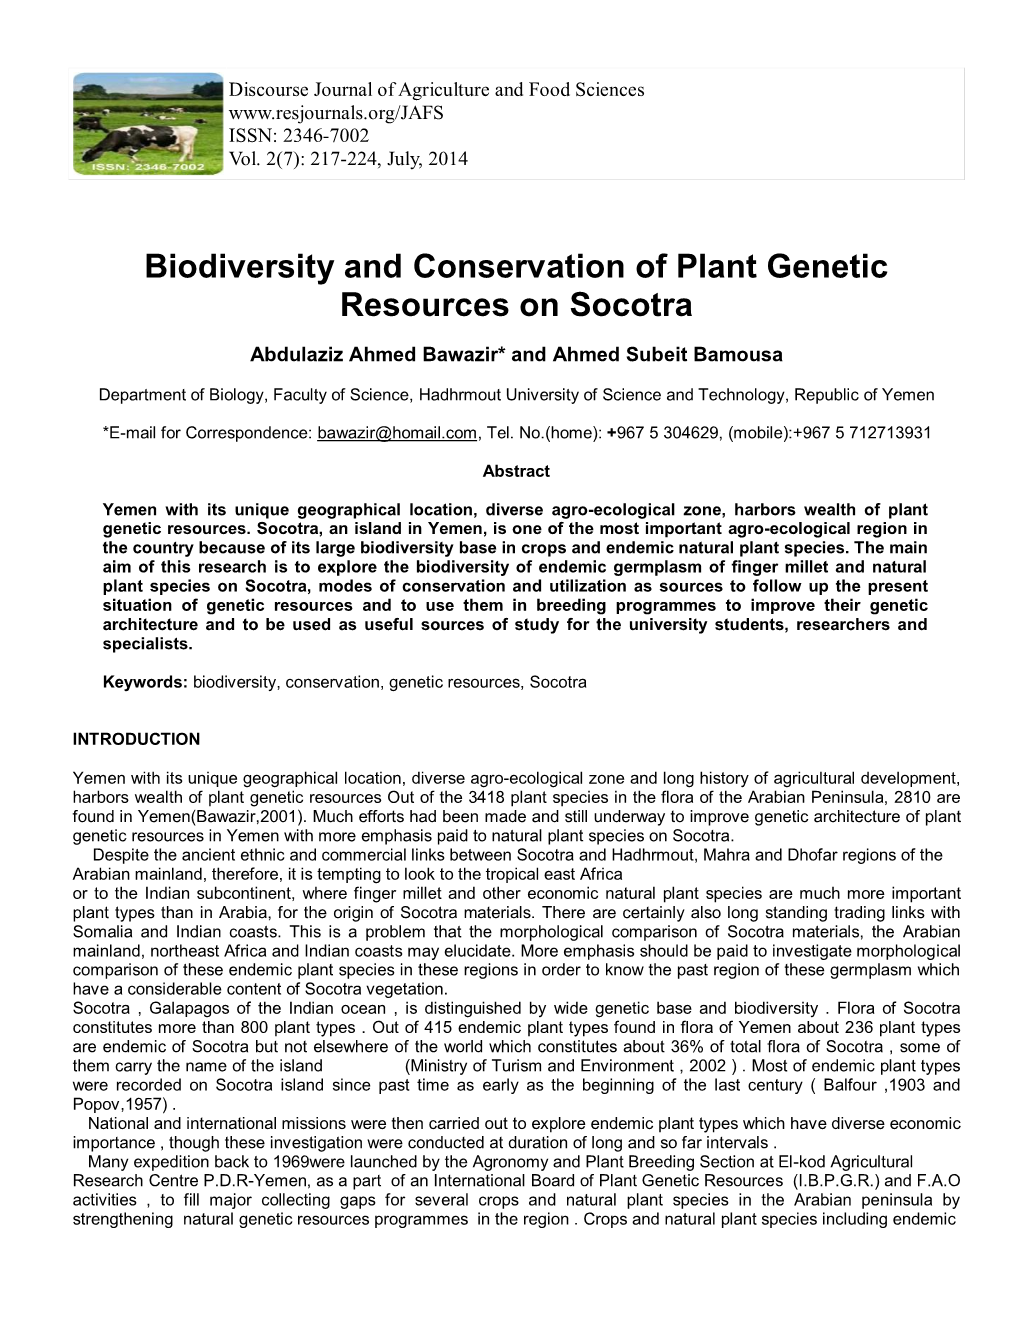 Biodiversity and Conservation of Plant Genetic Resources on Socotra